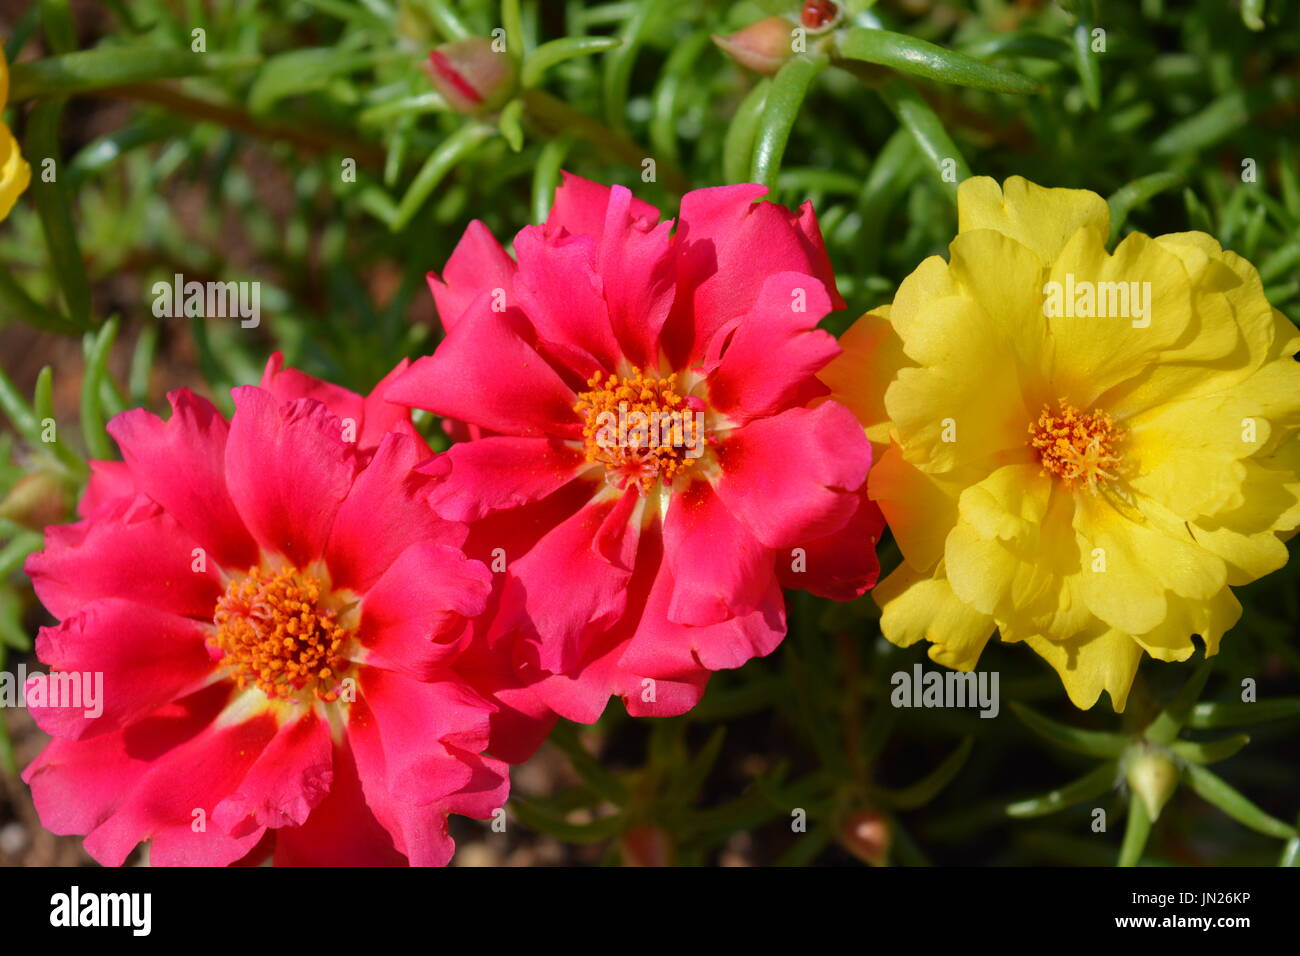 Portulaca grandiflora, also known as Moss rose,  in flower Stock Photo